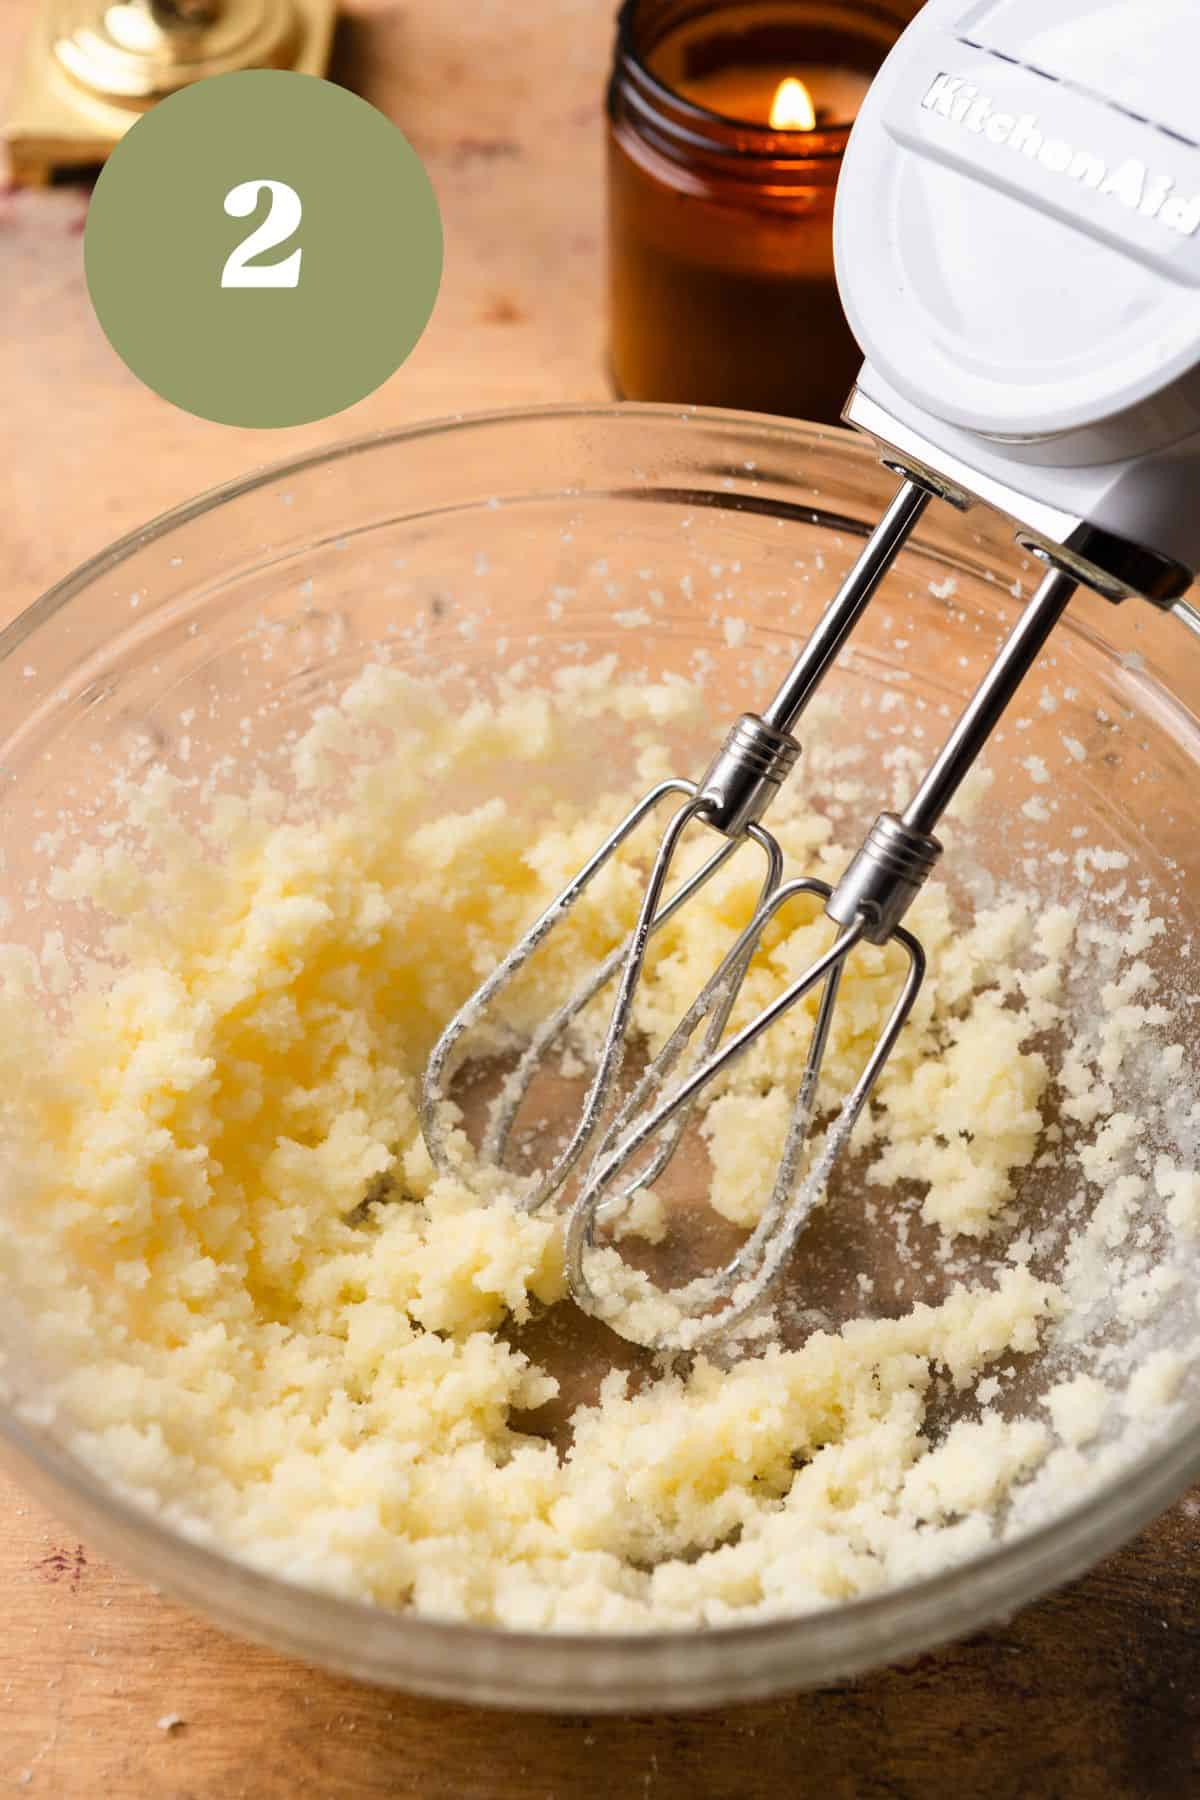 Creaming butter and sugar with a mixer in a glass bowl.